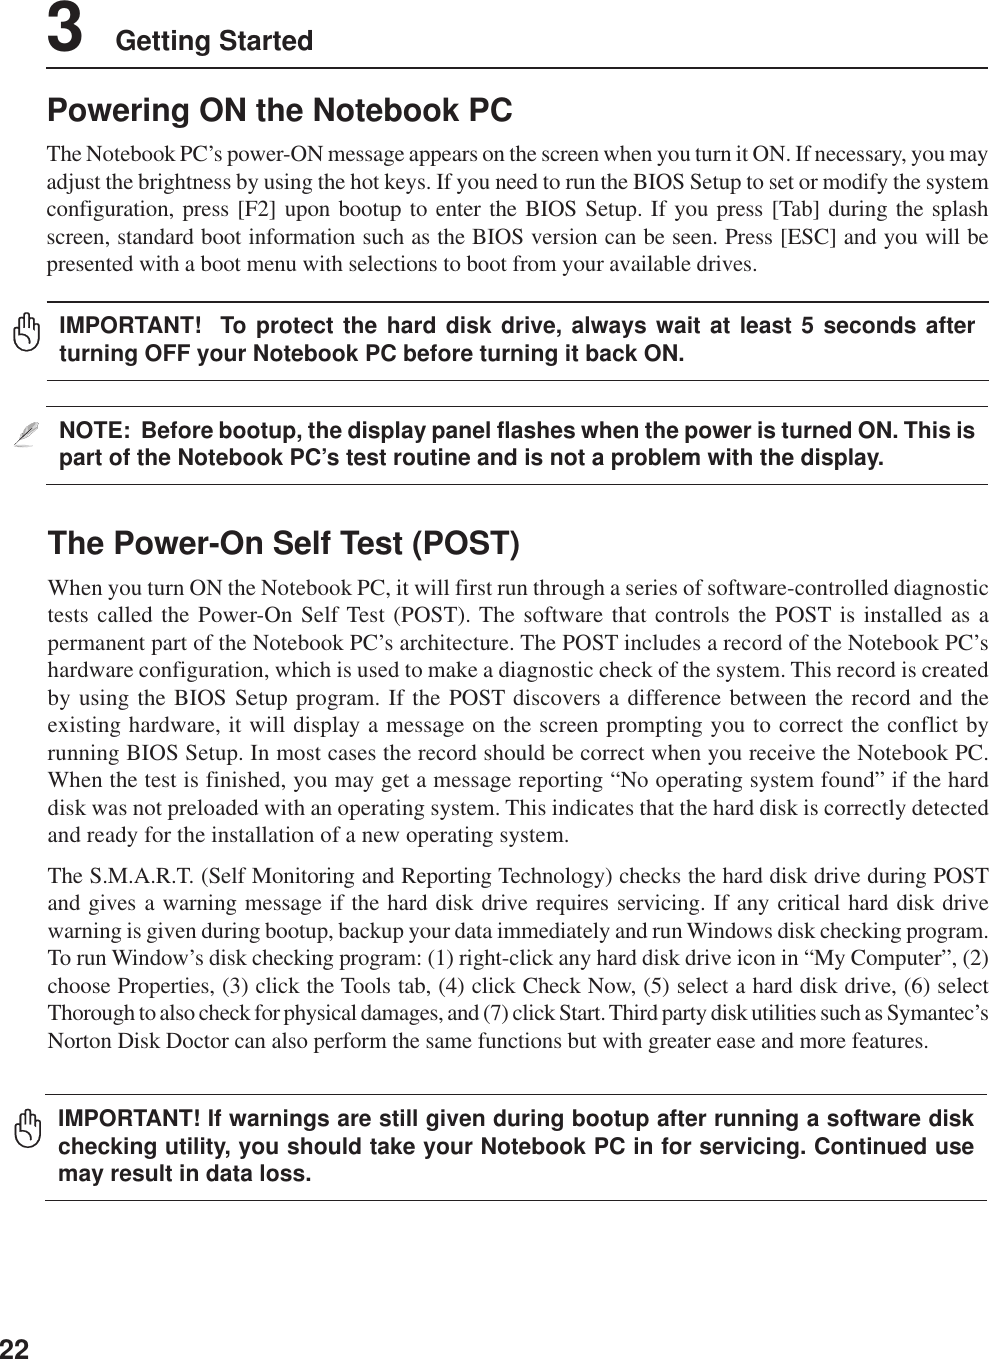 223    Getting StartedThe Power-On Self Test (POST)When you turn ON the Notebook PC, it will first run through a series of software-controlled diagnostictests called the Power-On Self Test (POST). The software that controls the POST is installed as apermanent part of the Notebook PC’s architecture. The POST includes a record of the Notebook PC’shardware configuration, which is used to make a diagnostic check of the system. This record is createdby using the BIOS Setup program. If the POST discovers a difference between the record and theexisting hardware, it will display a message on the screen prompting you to correct the conflict byrunning BIOS Setup. In most cases the record should be correct when you receive the Notebook PC.When the test is finished, you may get a message reporting “No operating system found” if the harddisk was not preloaded with an operating system. This indicates that the hard disk is correctly detectedand ready for the installation of a new operating system.The S.M.A.R.T. (Self Monitoring and Reporting Technology) checks the hard disk drive during POSTand gives a warning message if the hard disk drive requires servicing. If any critical hard disk drivewarning is given during bootup, backup your data immediately and run Windows disk checking program.To run Window’s disk checking program: (1) right-click any hard disk drive icon in “My Computer”, (2)choose Properties, (3) click the Tools tab, (4) click Check Now, (5) select a hard disk drive, (6) selectThorough to also check for physical damages, and (7) click Start. Third party disk utilities such as Symantec’sNorton Disk Doctor can also perform the same functions but with greater ease and more features.Powering ON the Notebook PCThe Notebook PC’s power-ON message appears on the screen when you turn it ON. If necessary, you mayadjust the brightness by using the hot keys. If you need to run the BIOS Setup to set or modify the systemconfiguration, press [F2] upon bootup to enter the BIOS Setup. If you press [Tab] during the splashscreen, standard boot information such as the BIOS version can be seen. Press [ESC] and you will bepresented with a boot menu with selections to boot from your available drives.NOTE:  Before bootup, the display panel flashes when the power is turned ON. This ispart of the Notebook PC’s test routine and is not a problem with the display.IMPORTANT! If warnings are still given during bootup after running a software diskchecking utility, you should take your Notebook PC in for servicing. Continued usemay result in data loss.IMPORTANT!  To protect the hard disk drive, always wait at least 5 seconds afterturning OFF your Notebook PC before turning it back ON.